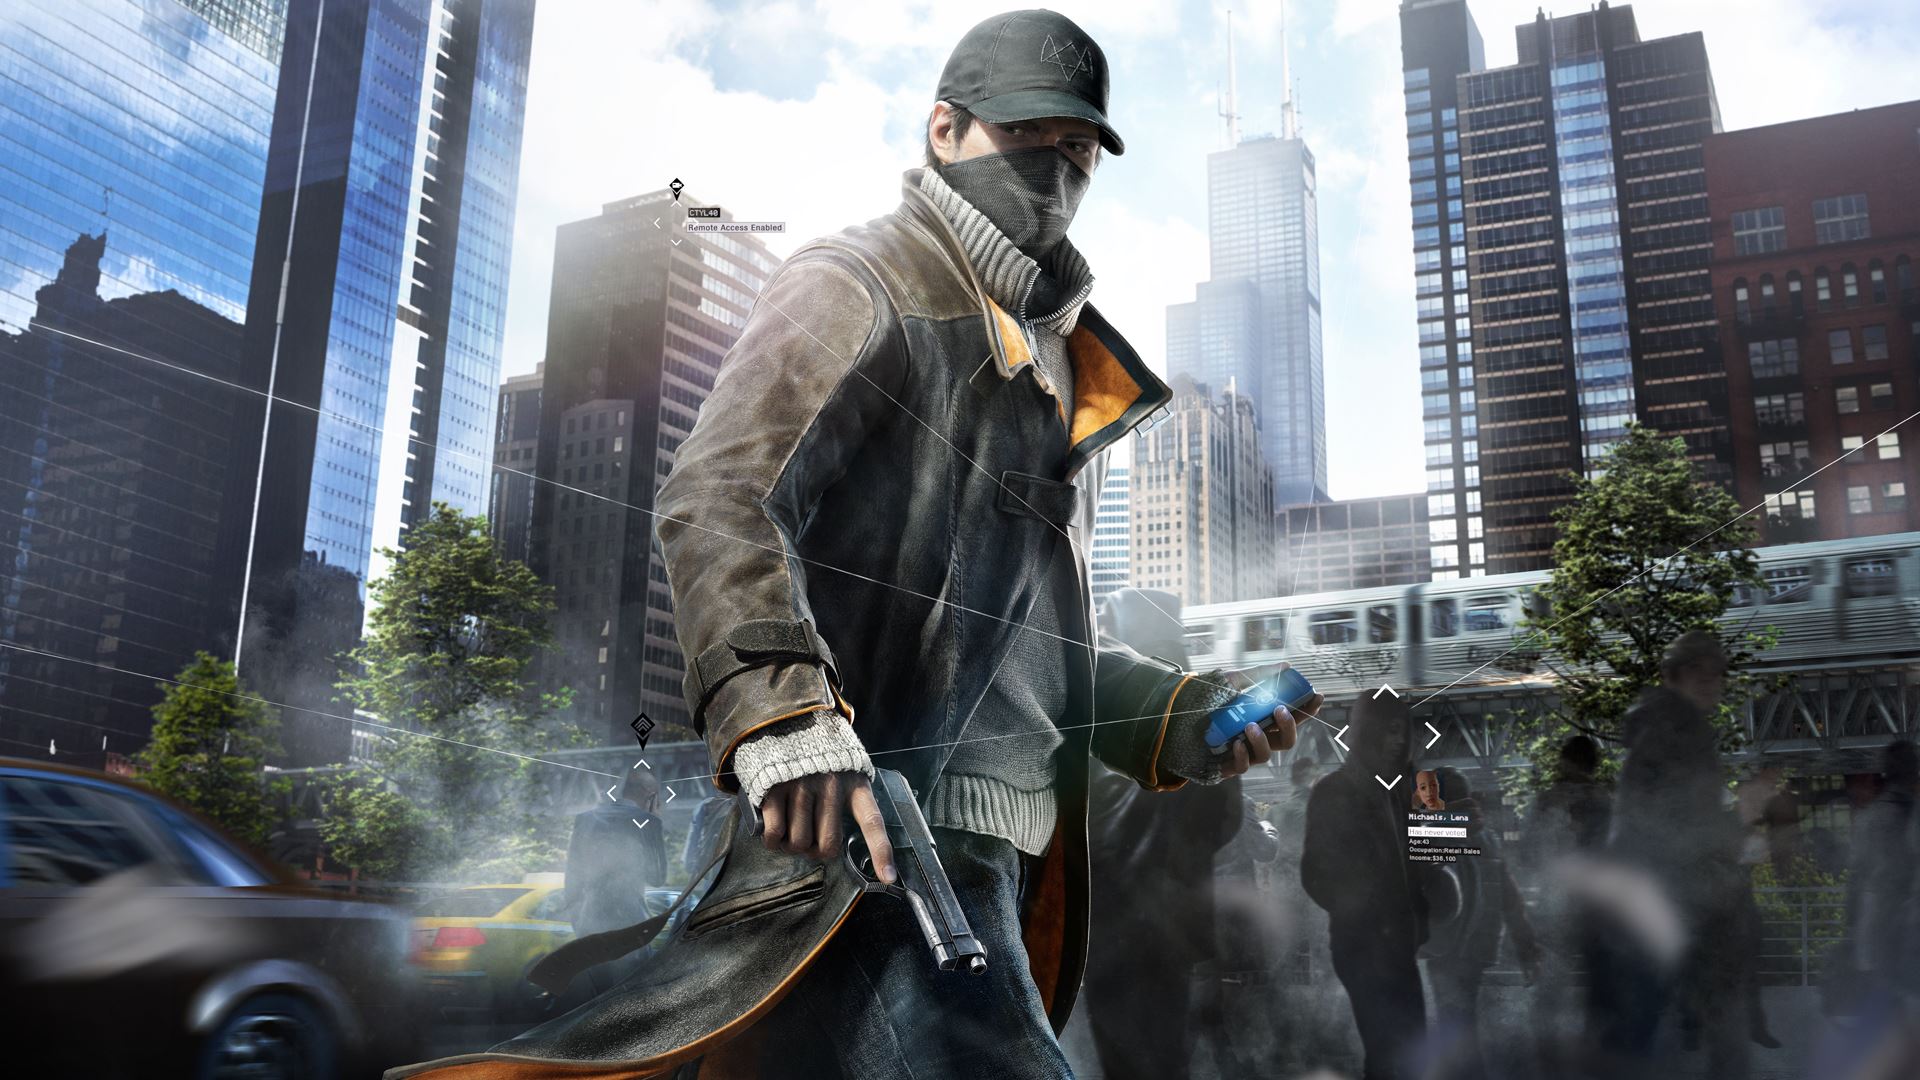 Will Aiden Pearce get teh World Cup of Characters